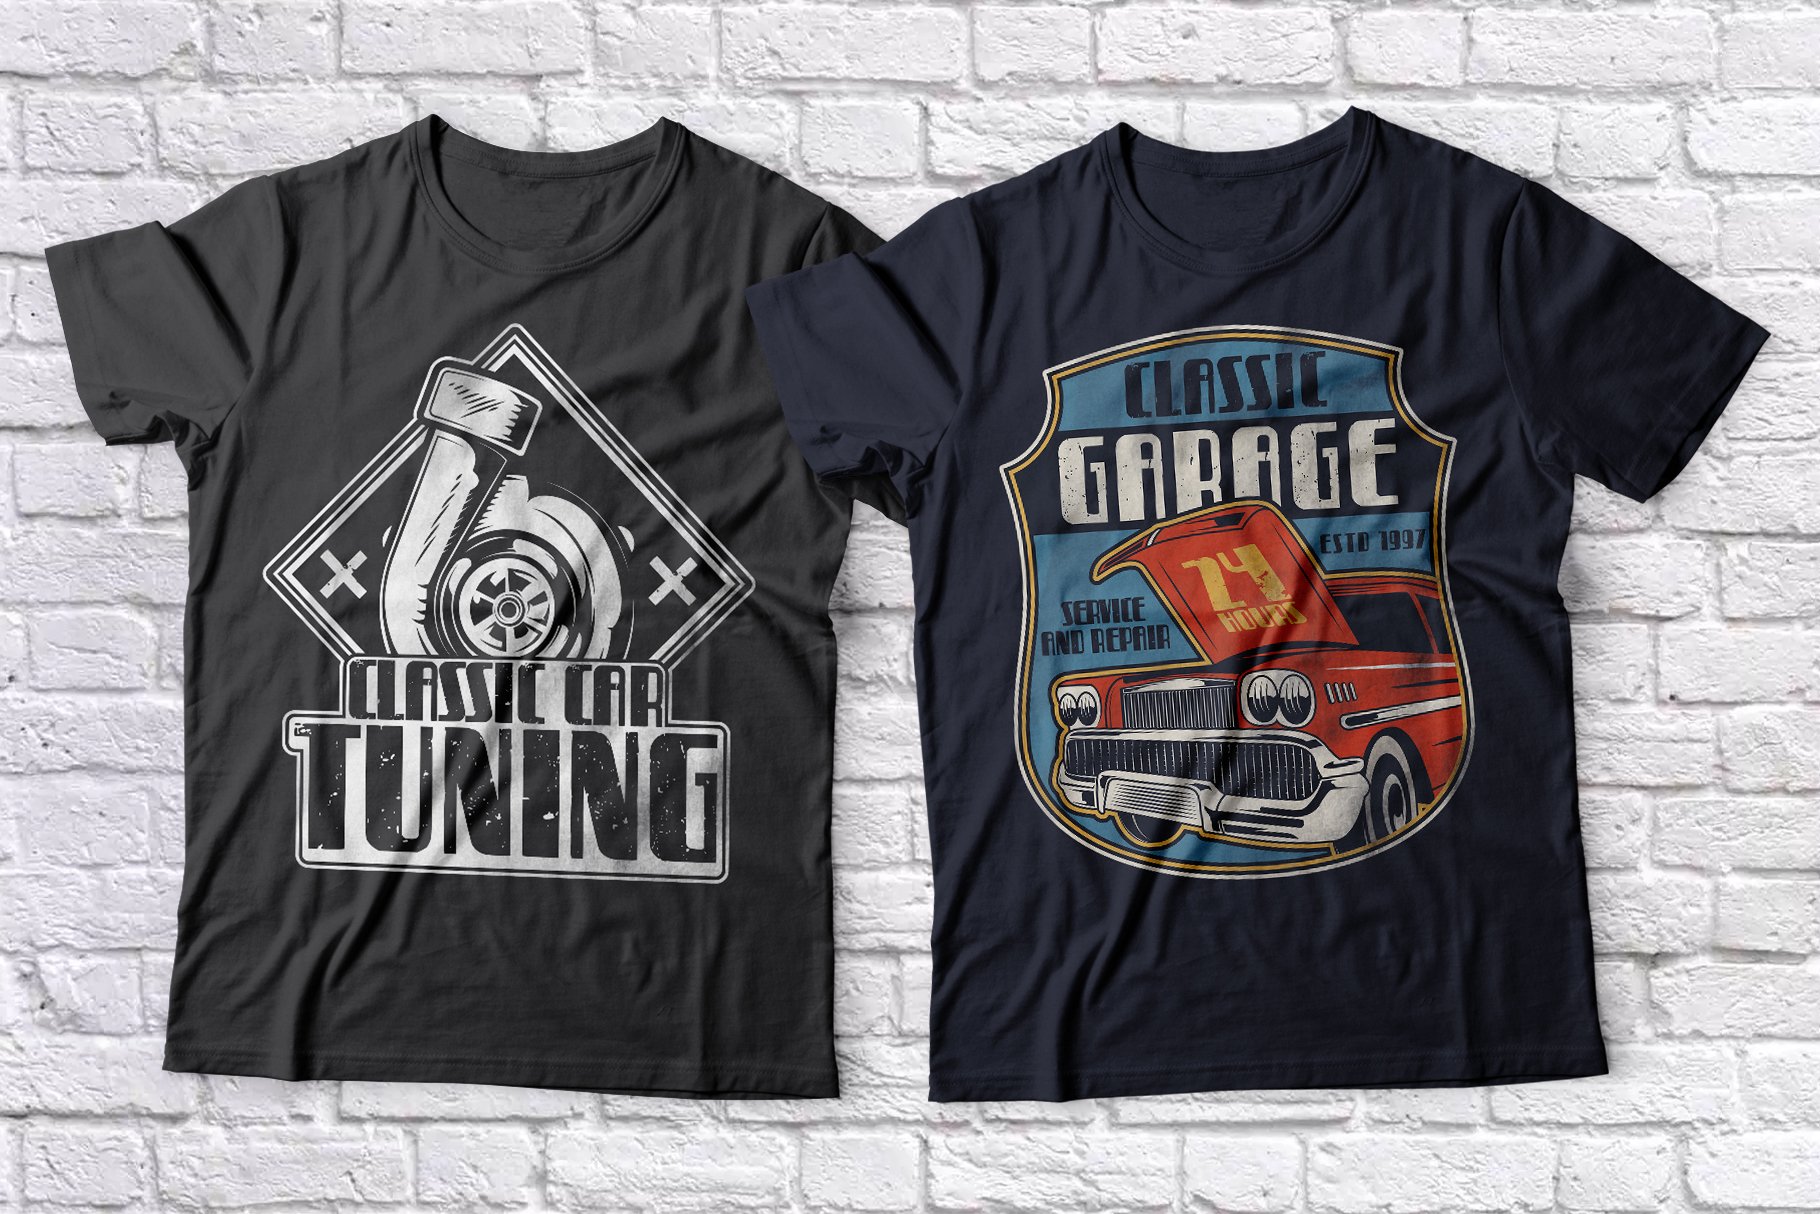 Black t-shirts with vintage cars.